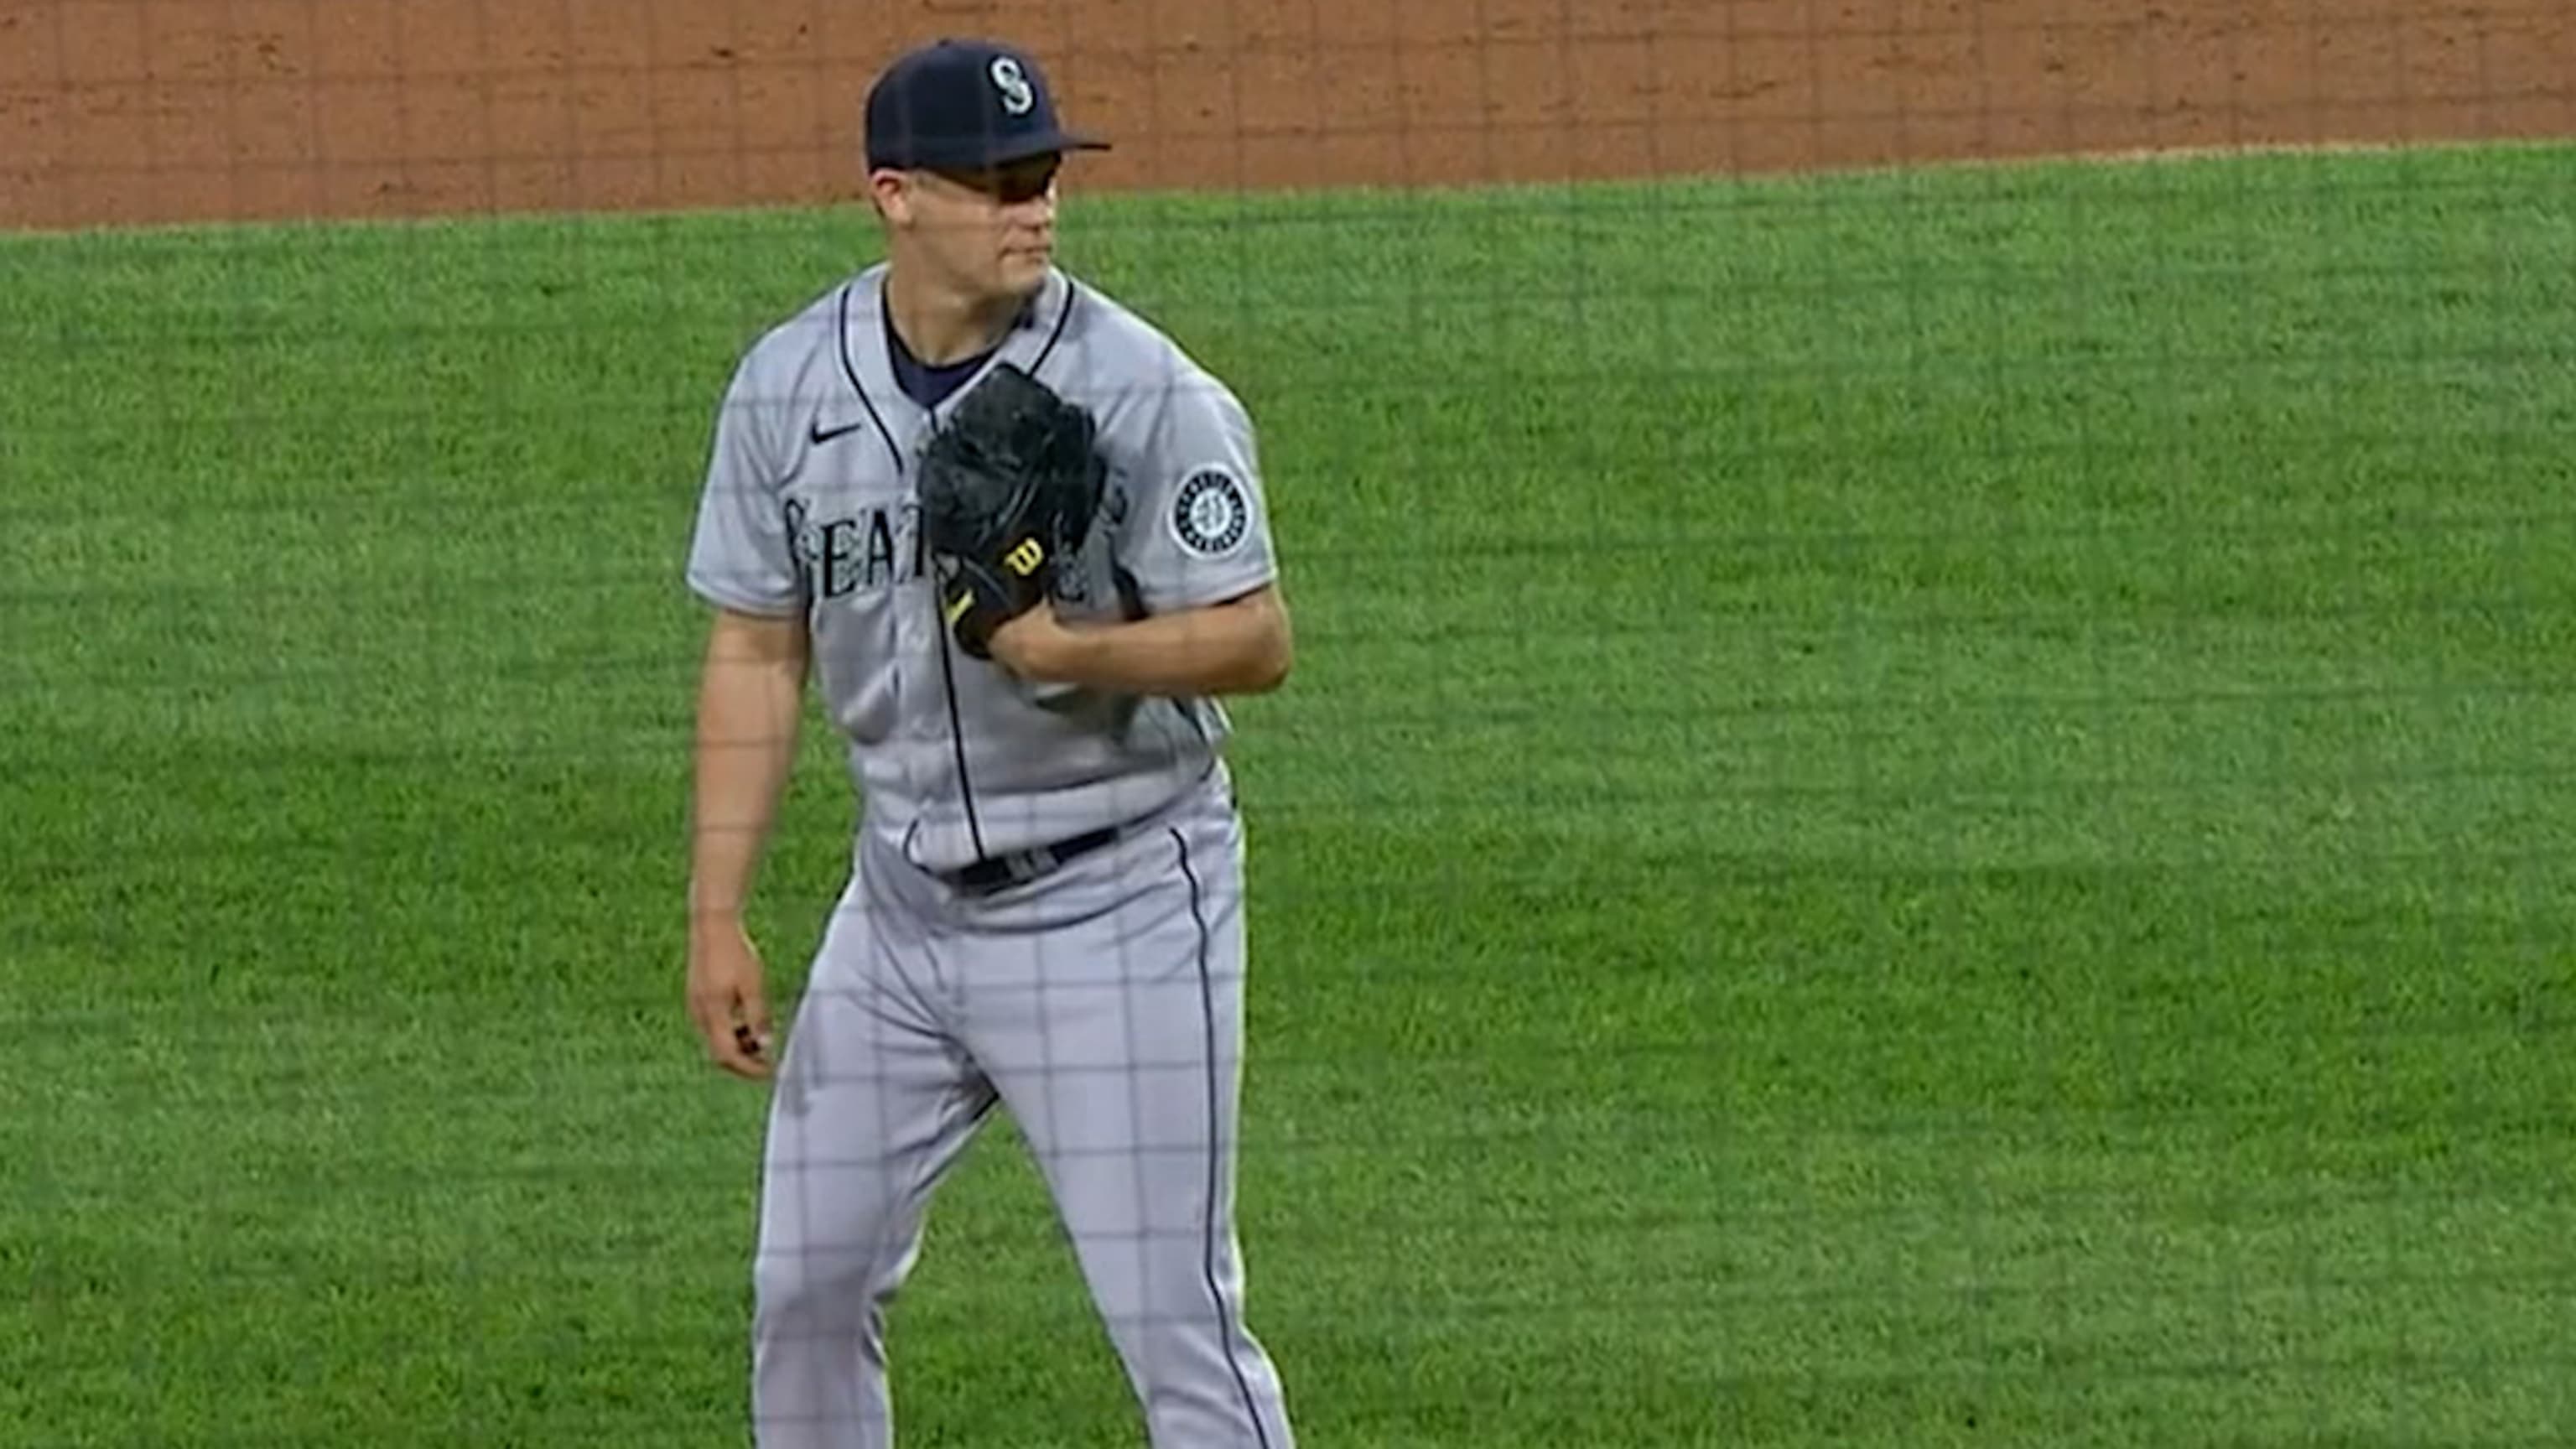 Seattle Mariners relief pitcher Paul Sewald stands between